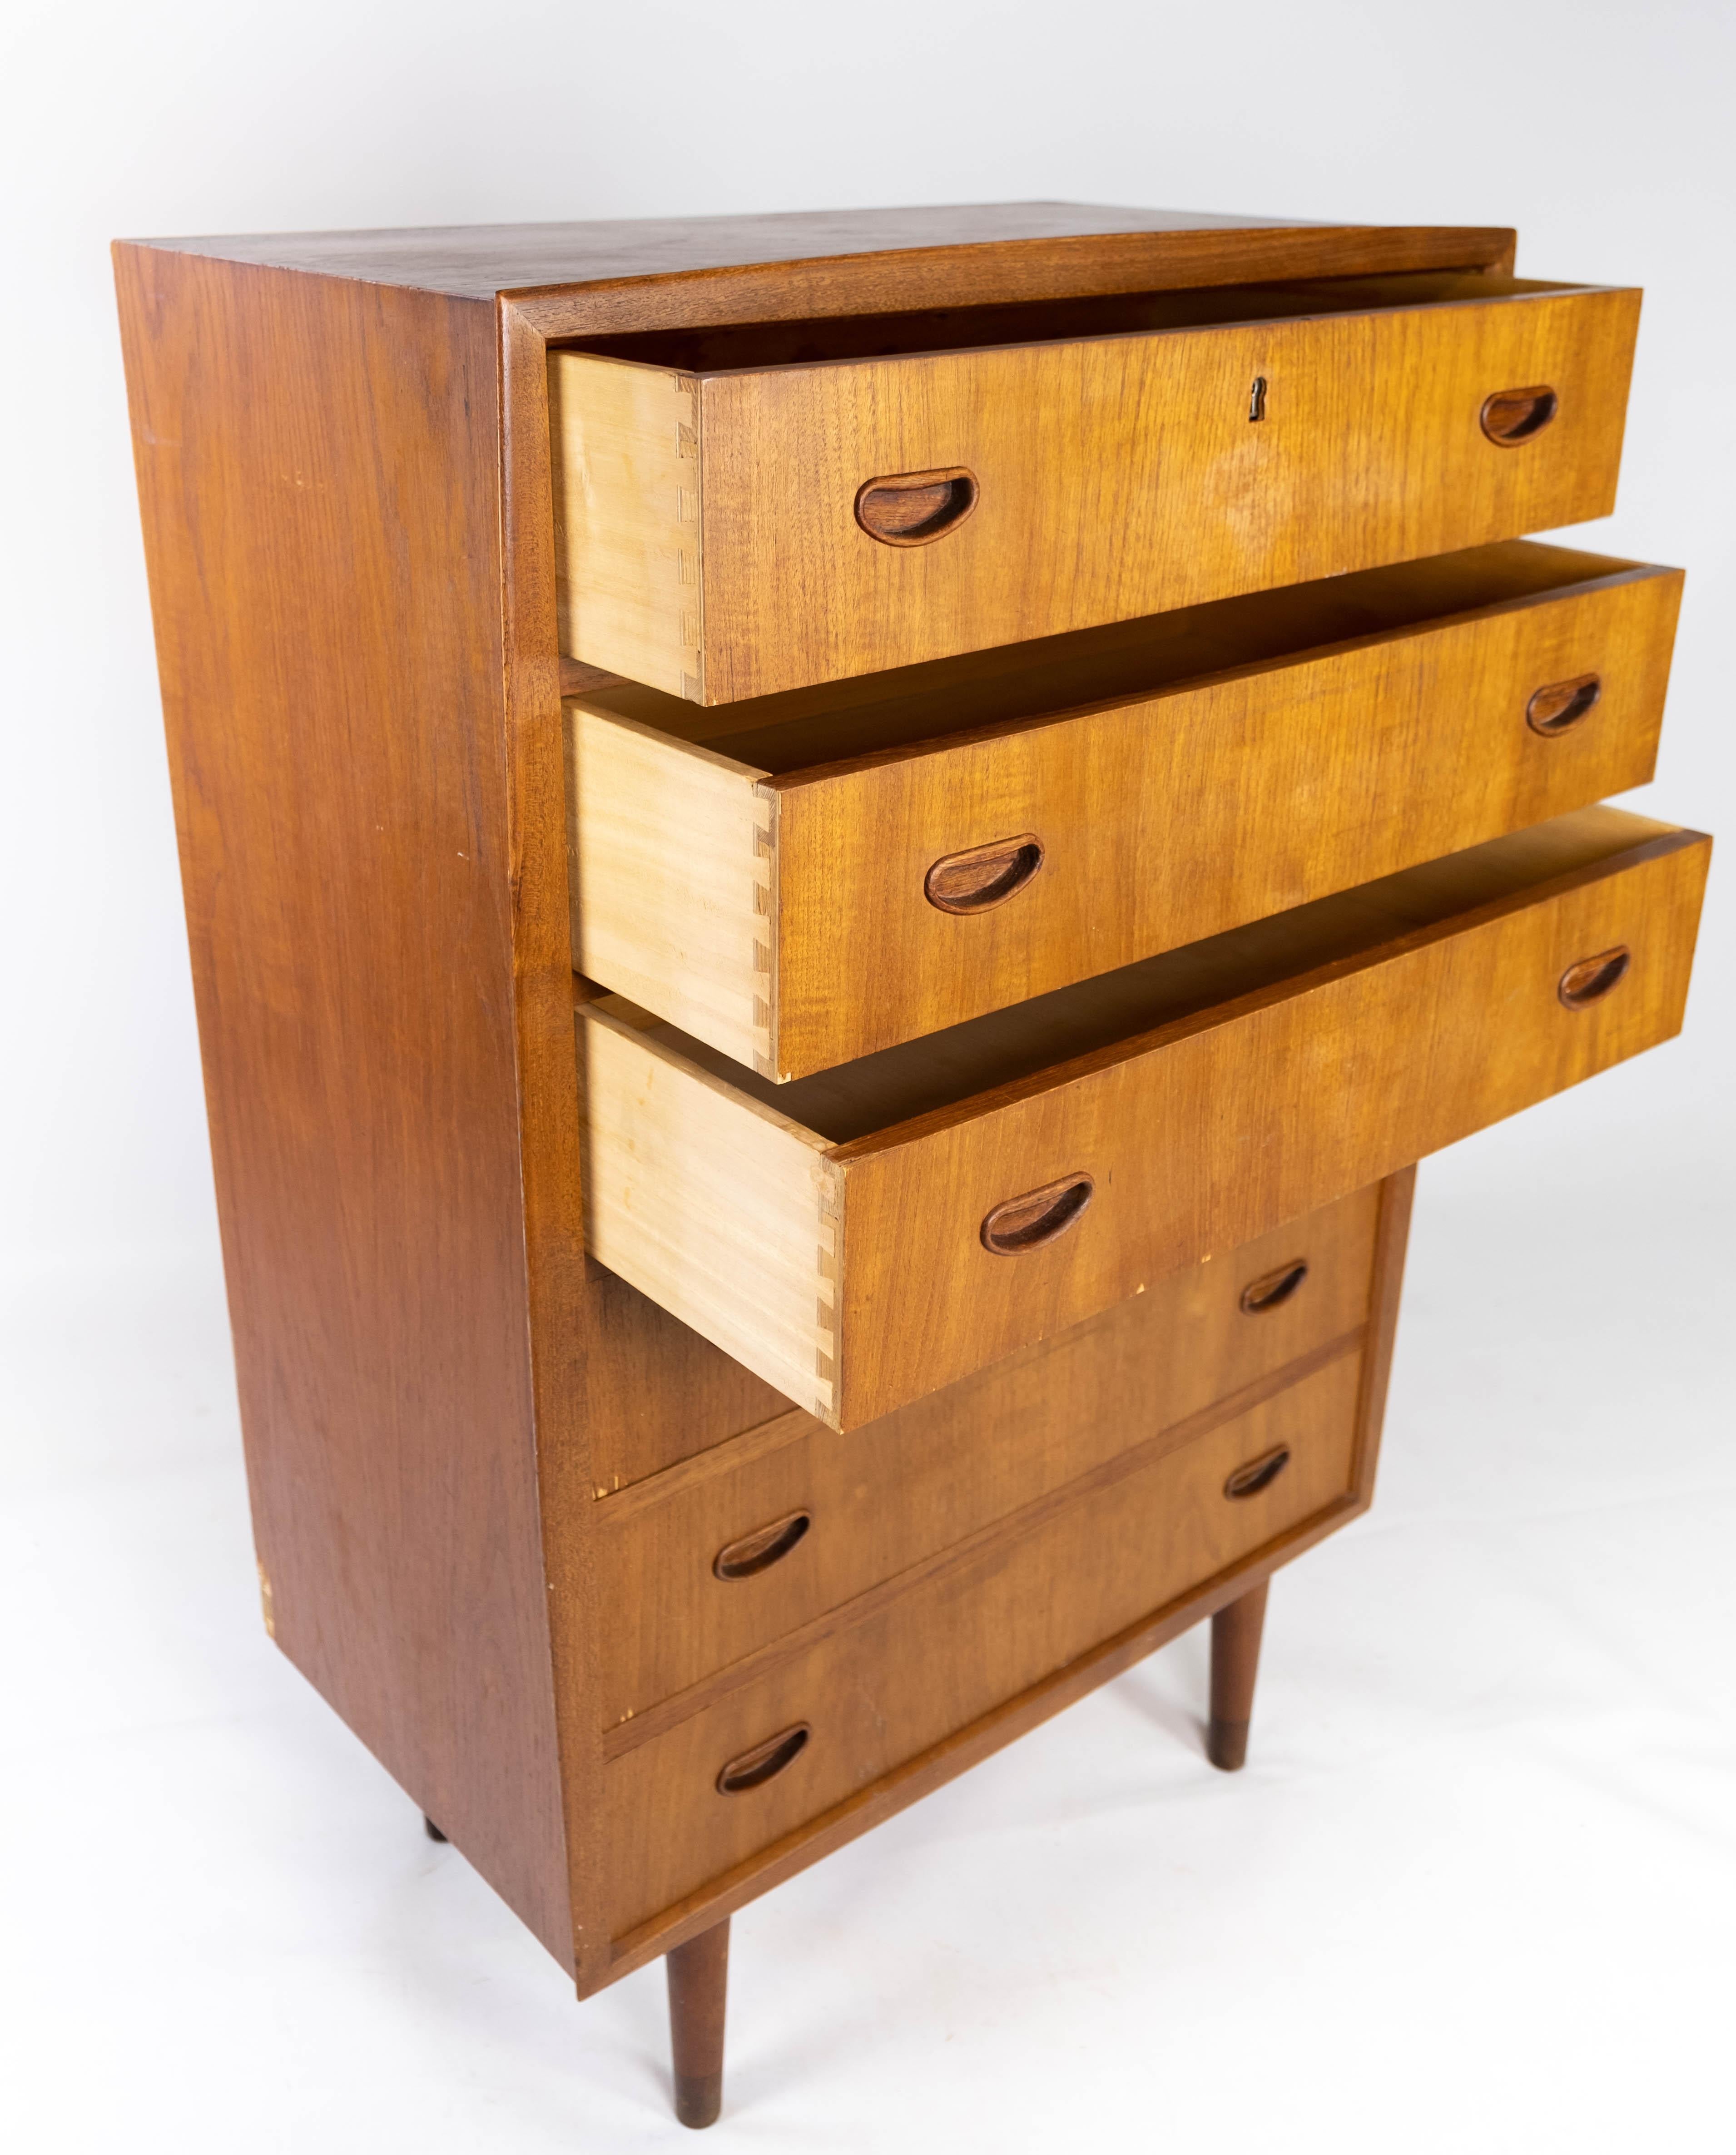 Mid-20th Century Chest of Drawers in Teak of Danish Design from the 1960s For Sale